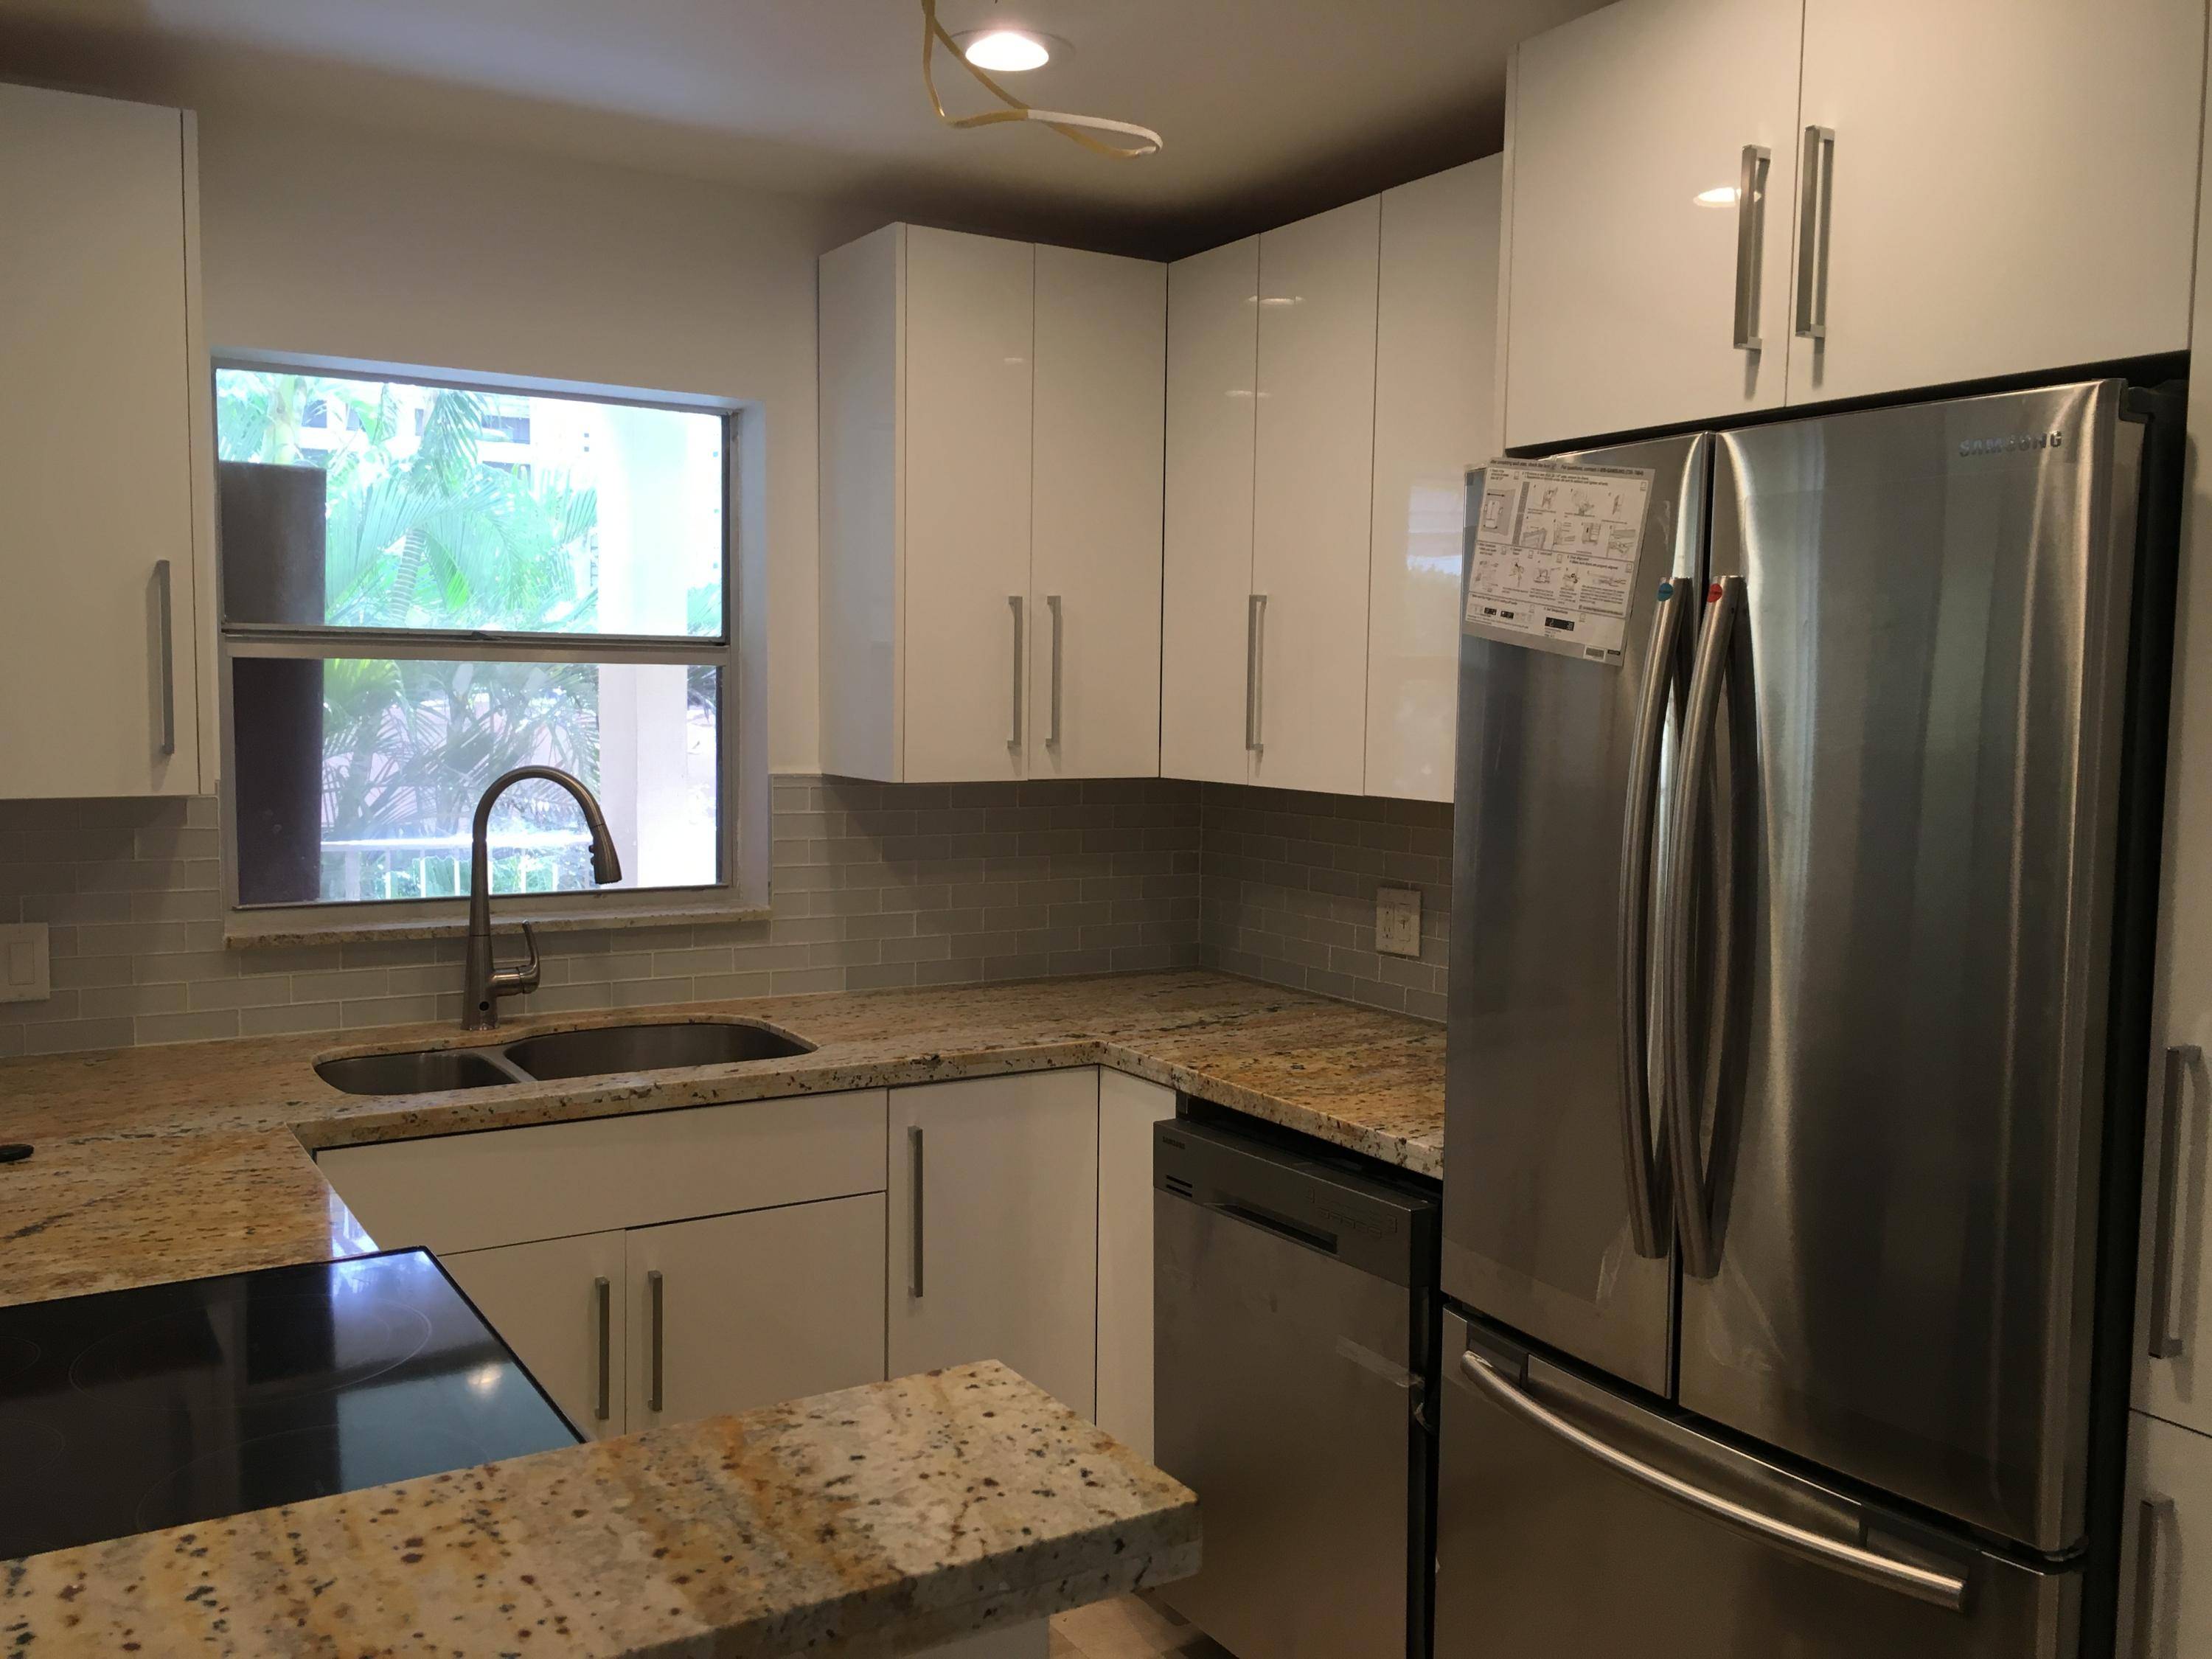 BEAUTIFUL 2 2 CONDO, REMODELED WITH STAINLESS STEEL APPLIANCES, ALL NEW IMPACT WINDOWS, GREAT WATER VIEWS FROM POOL AREA WITH A NICE CLUB HOUSE AND BARBECUE GRILLS.